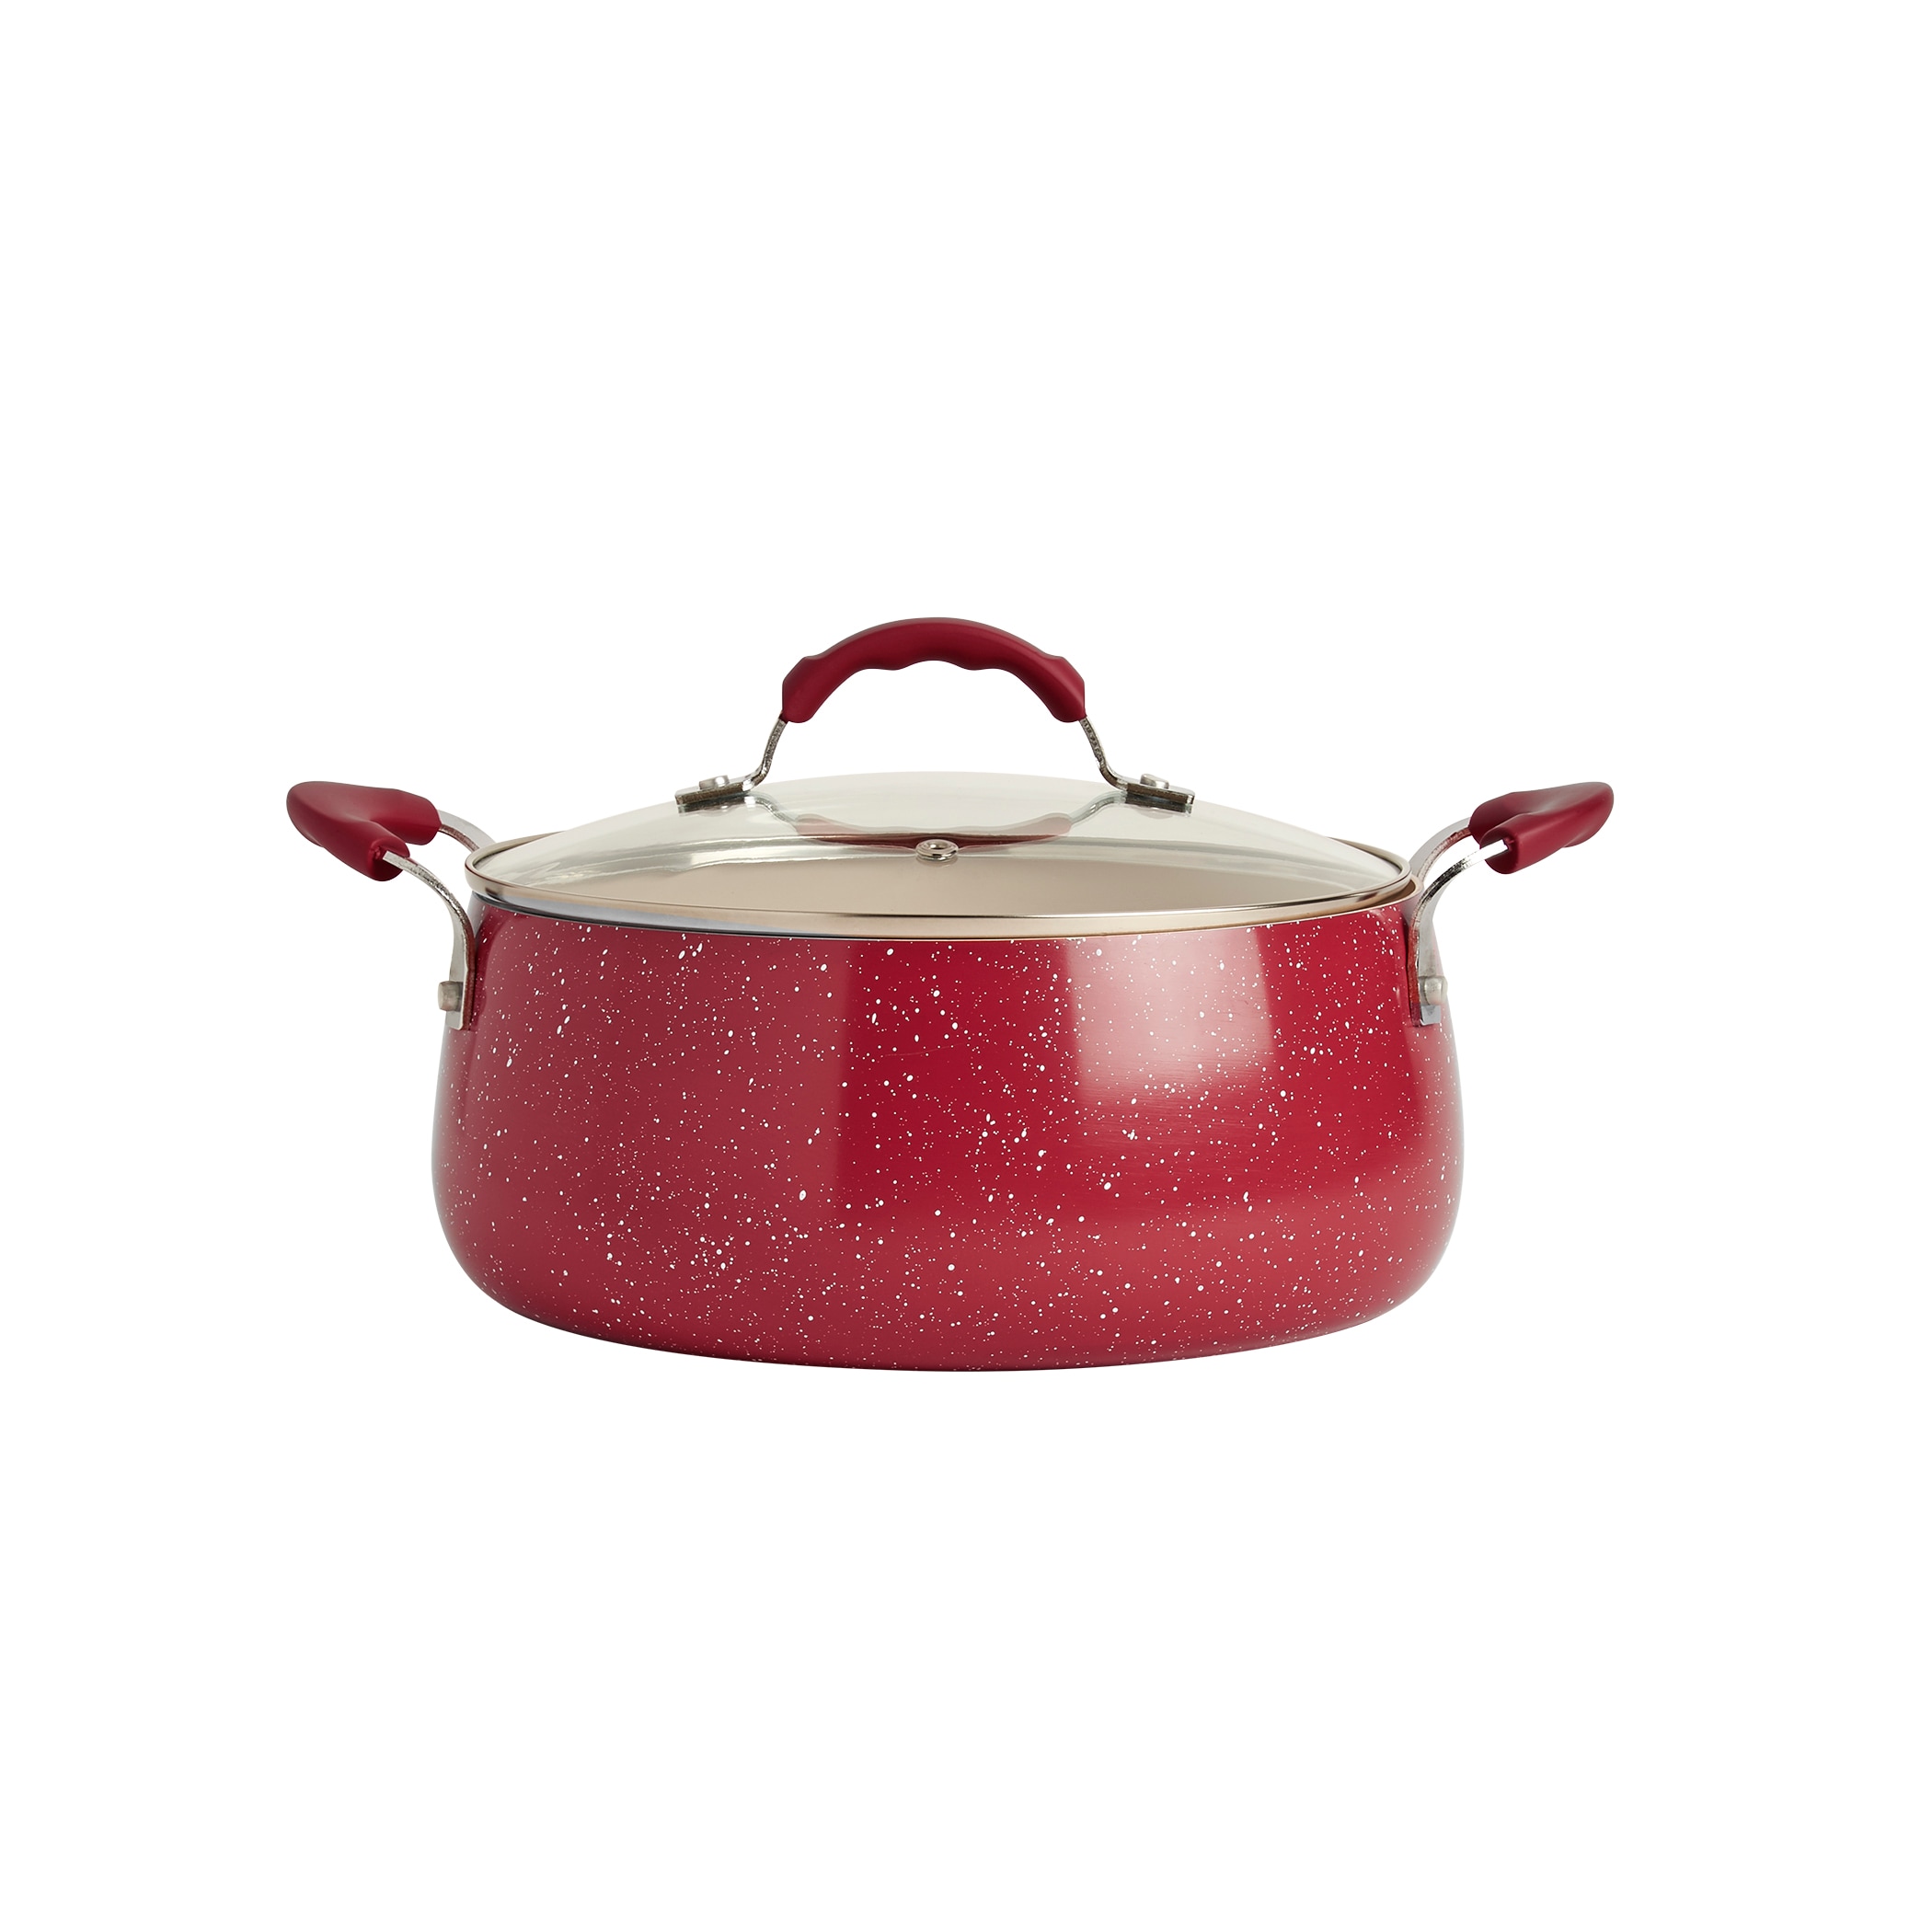 Dolly Parton 10-pc. Aluminum Cookware Set, Color: Red - JCPenney